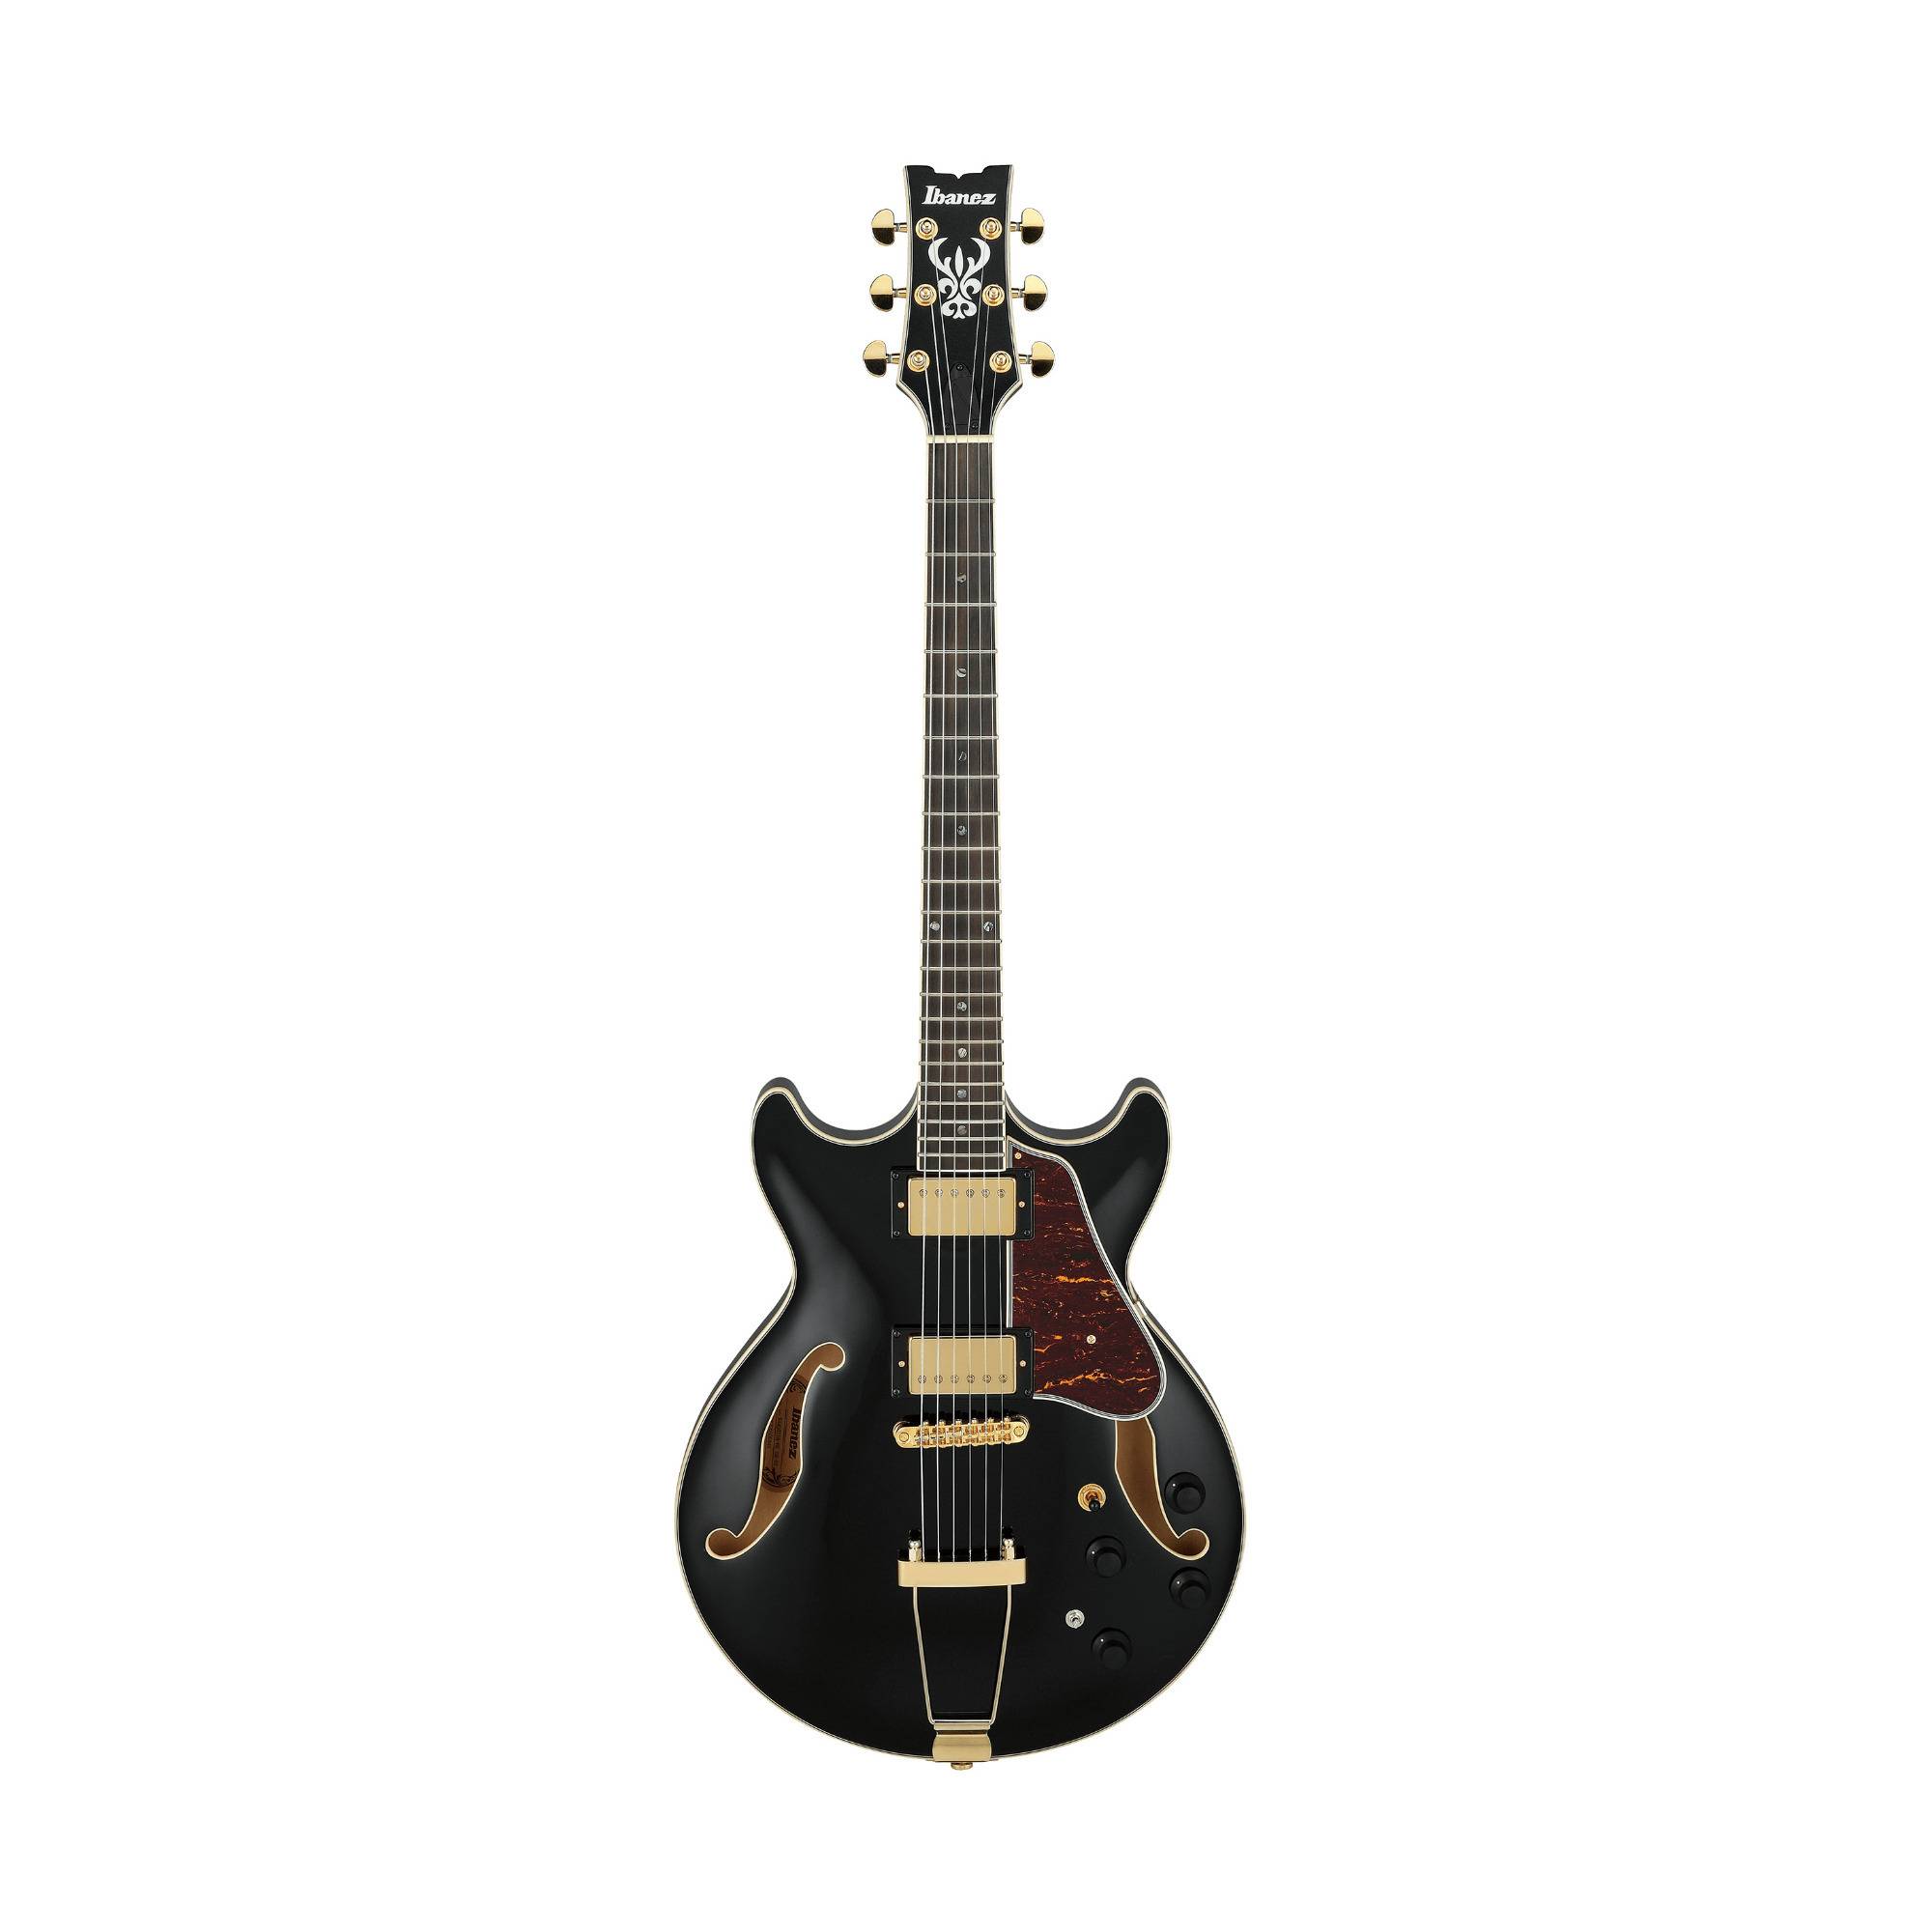 Ibanez AMH90 AM Series Artcore 6-String Electric Guitar (Black)